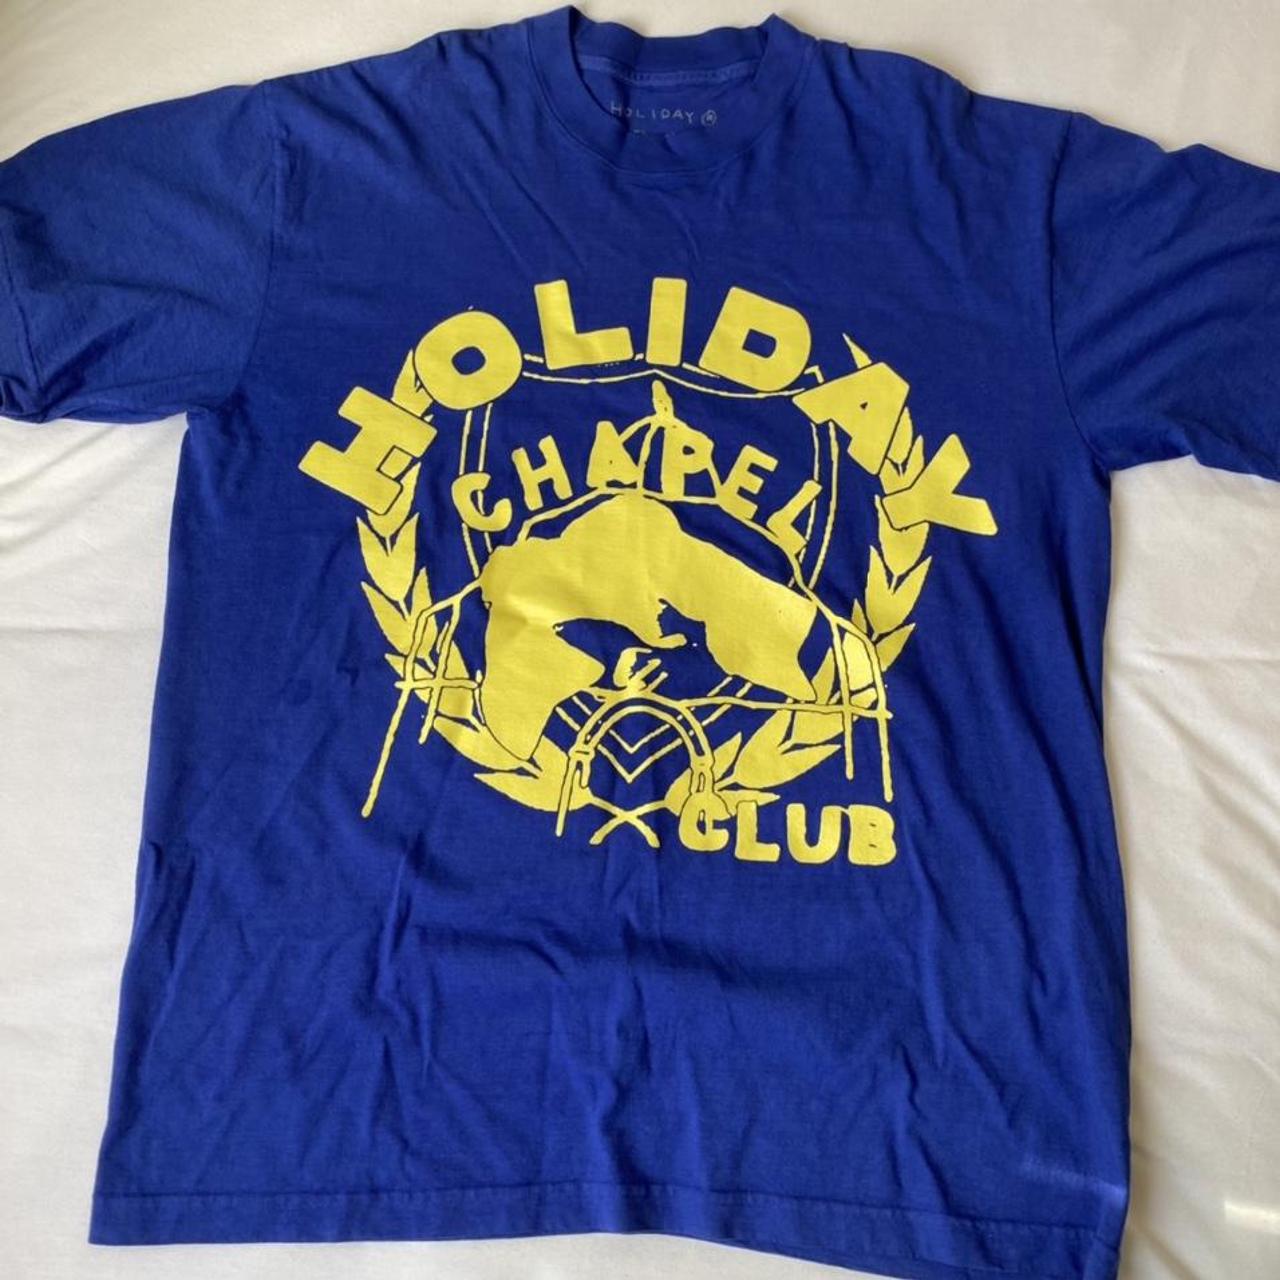 Holiday The Label Men's Blue and Yellow T-shirt